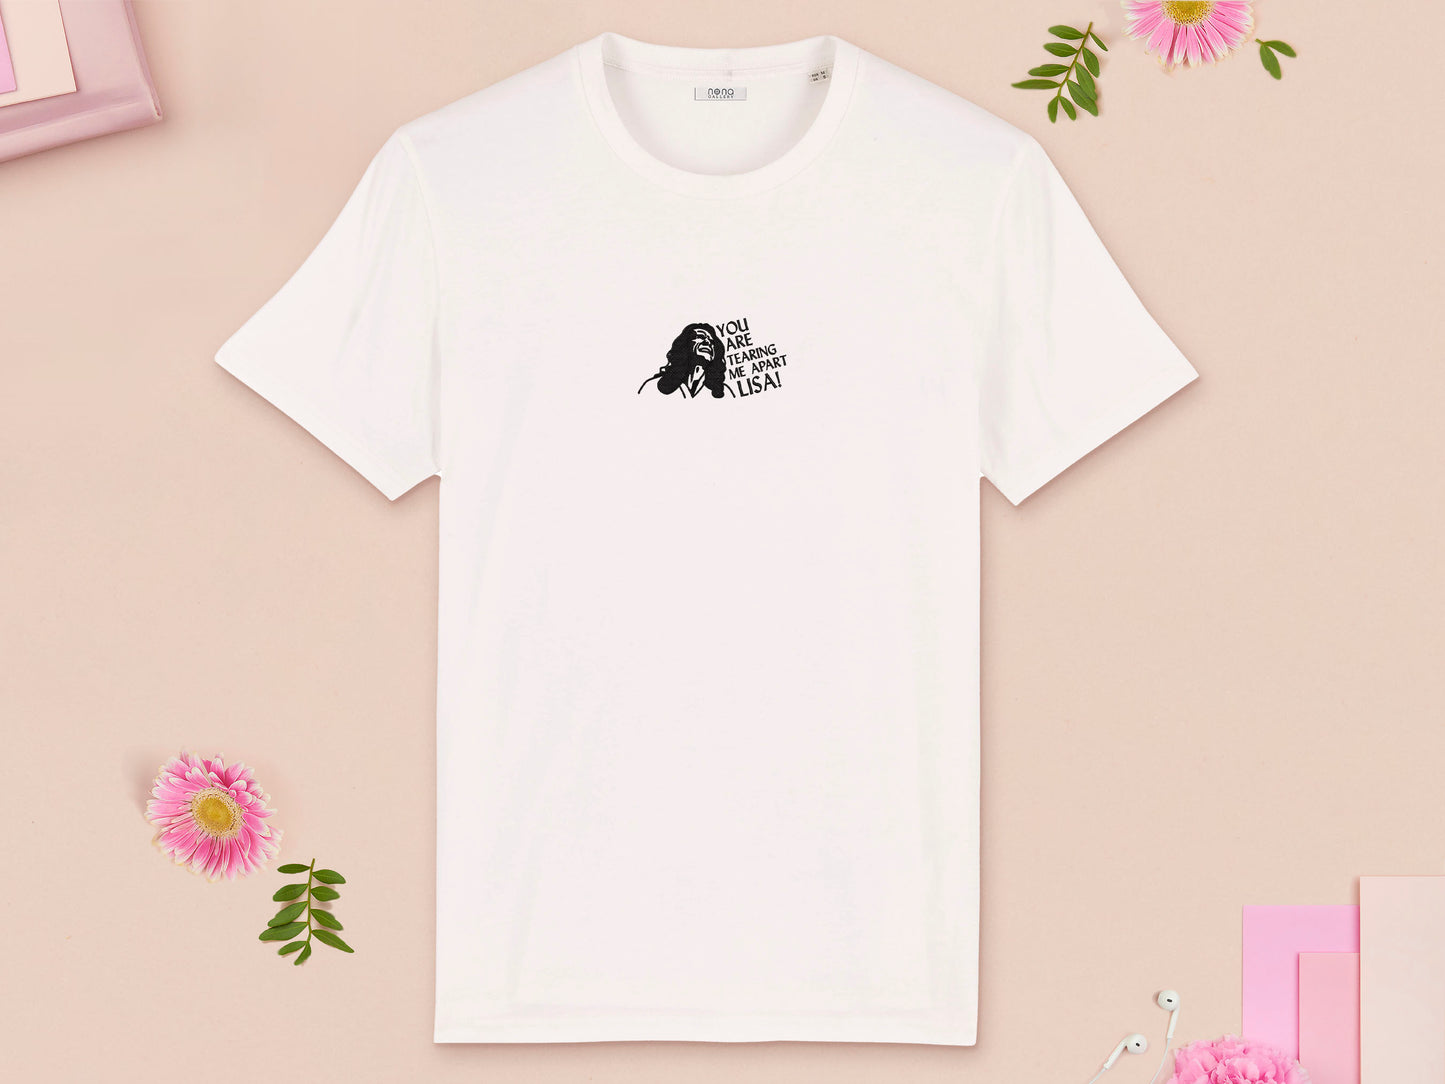 A short sleeved white t-shirt with an embroidered black design of Tommy Wiseau in the movie The Room with the quote You Are Tearing Me Apart Lisa!